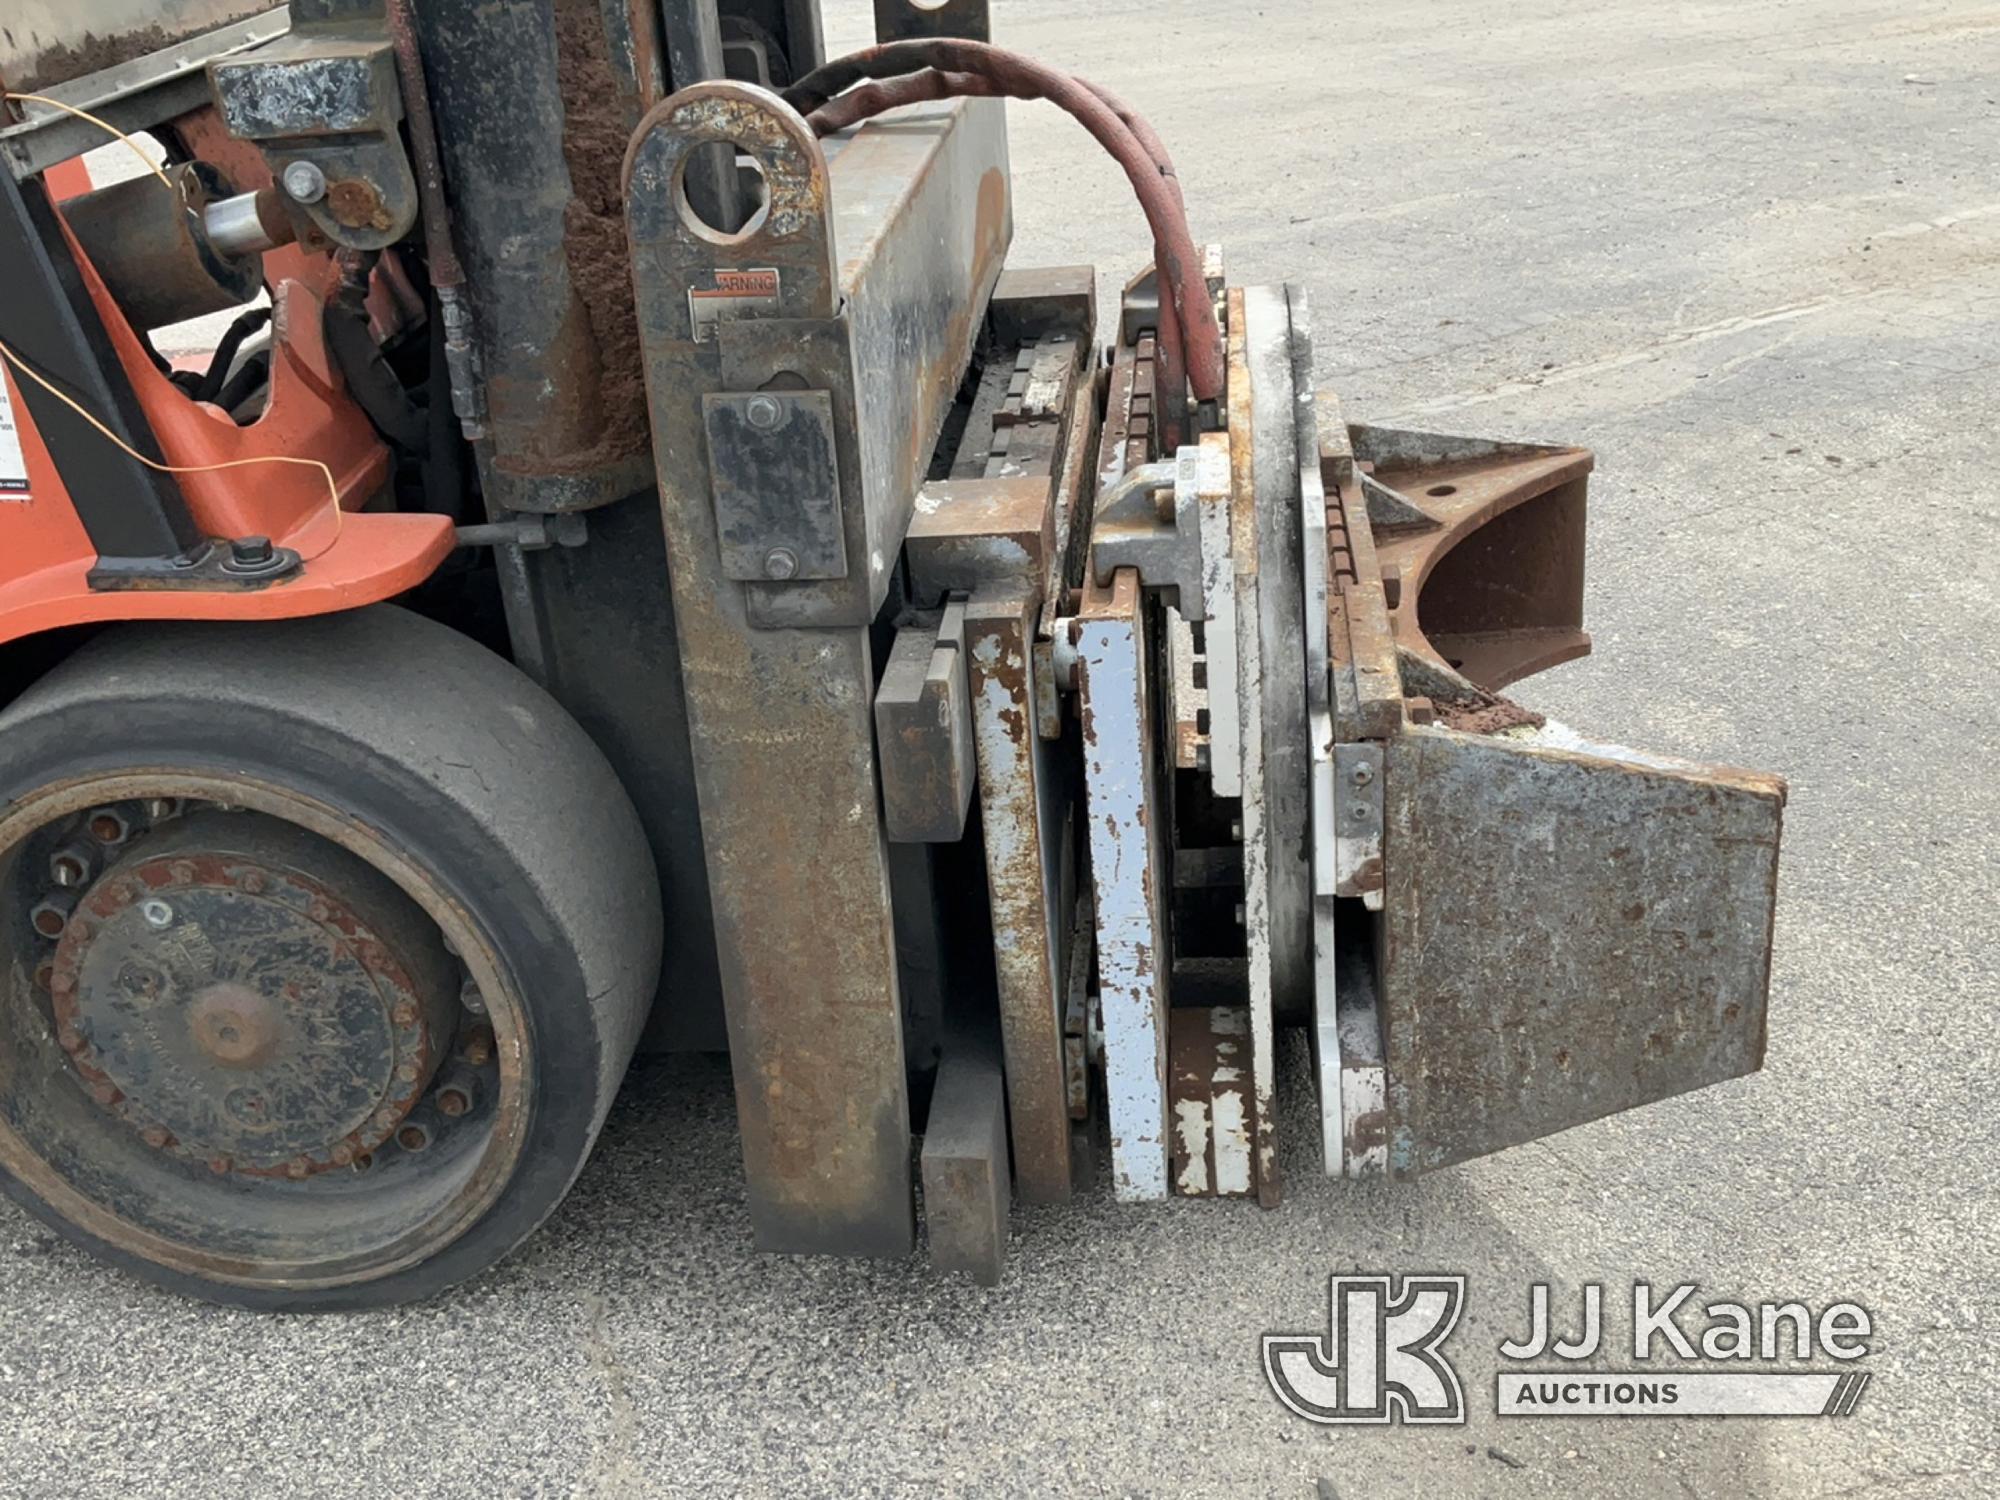 (South Beloit, IL) 2013 Lowry L180XDS Cushion Tired Forklift Runs, Moves, Operates) (Battery Needs t